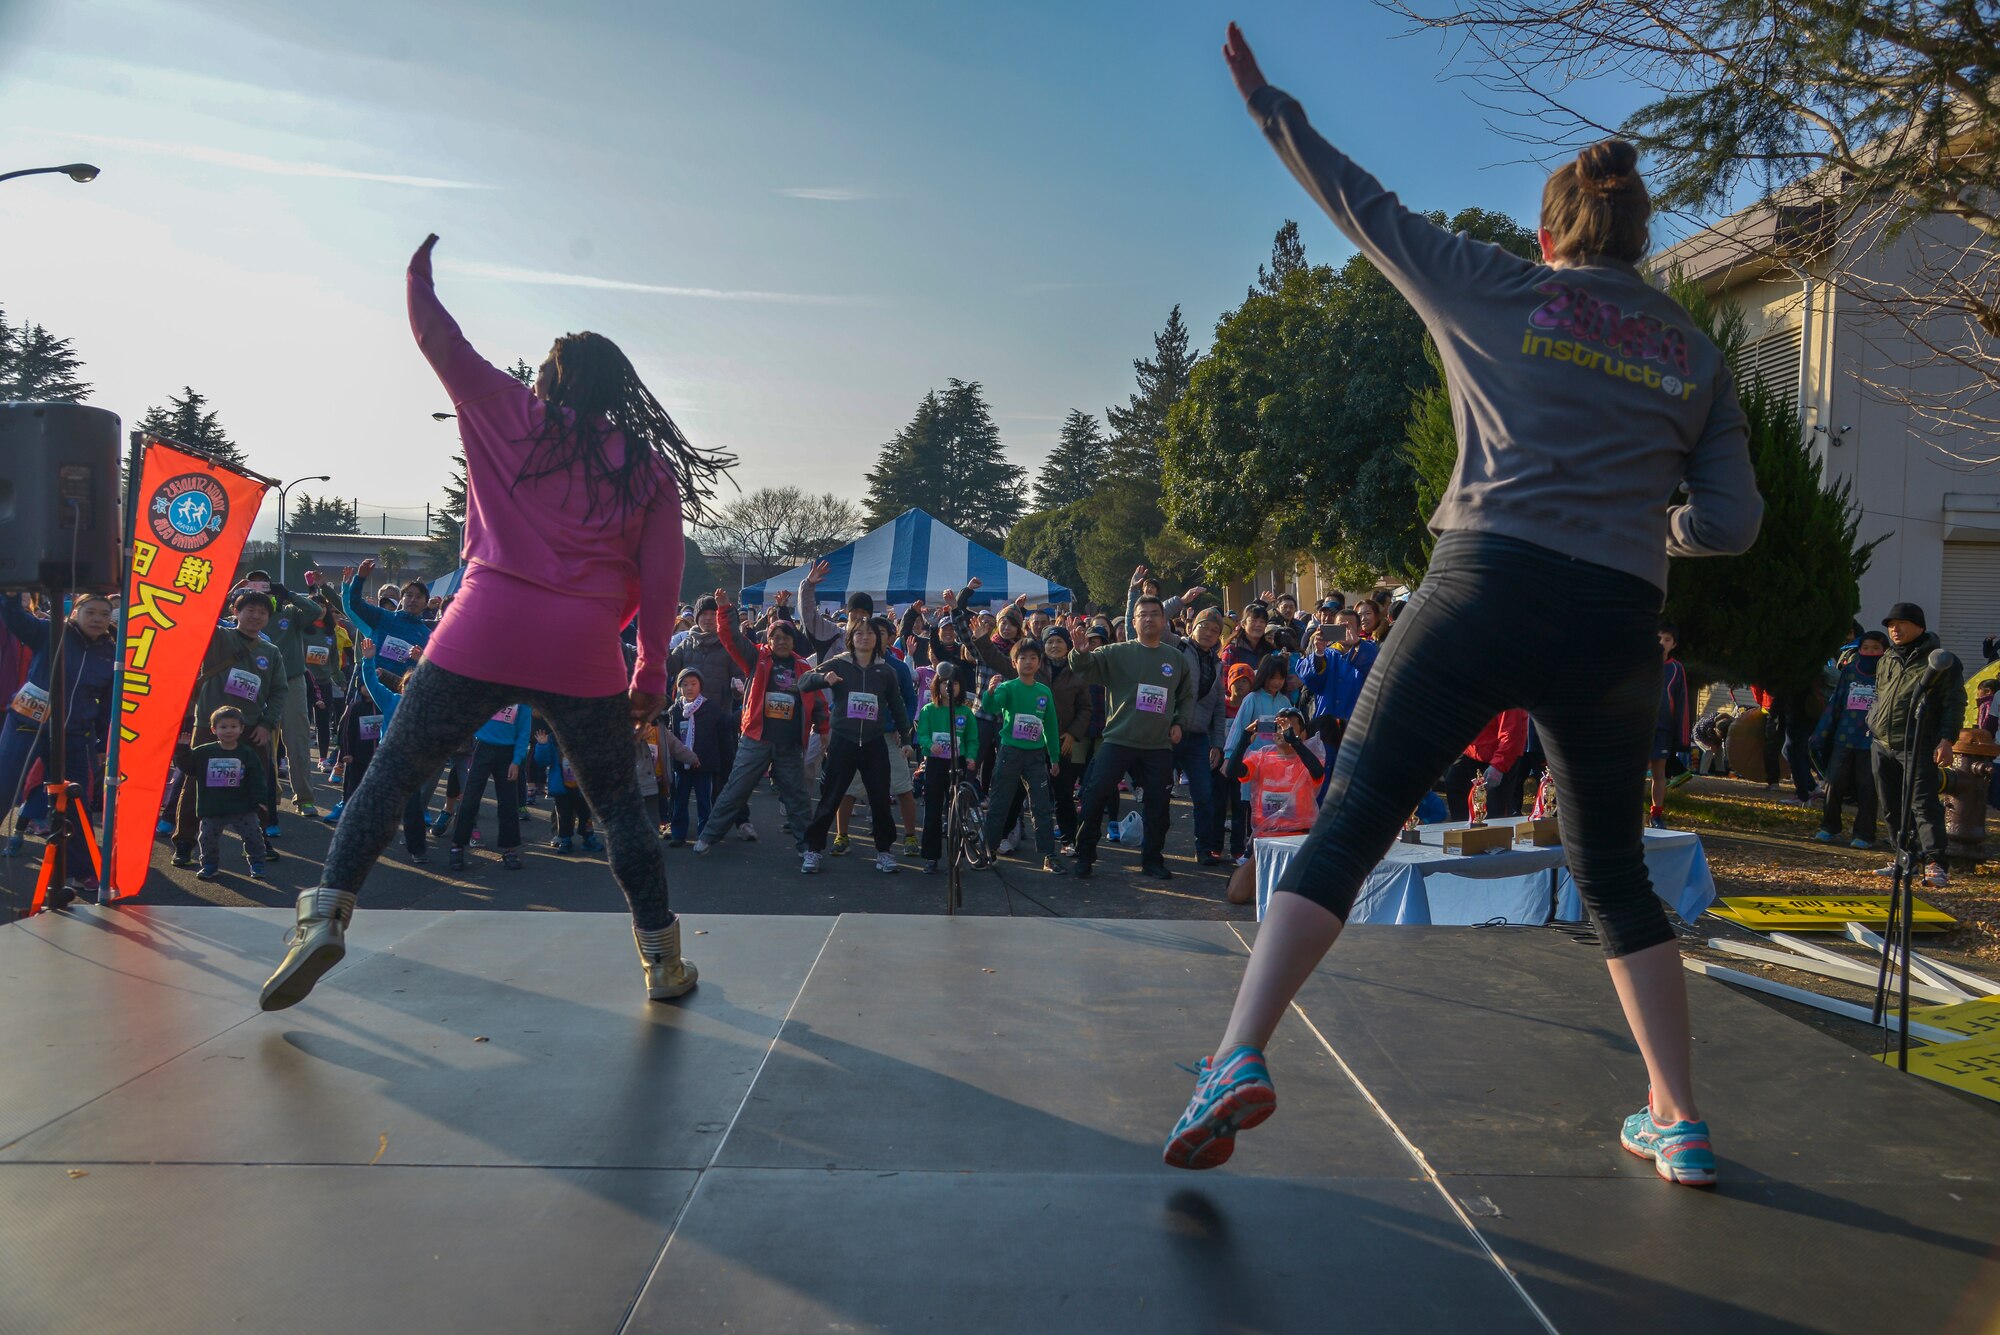 Participants in the 35th Annual Frostbite Run perform a Zumba style warm-up before the run at Yokota Air Base, Japan, Jan. 17, 2015. The run had approximately 9,000 participants. (U.S. Air Force photo by Senior Airman David Owsianka/Released)